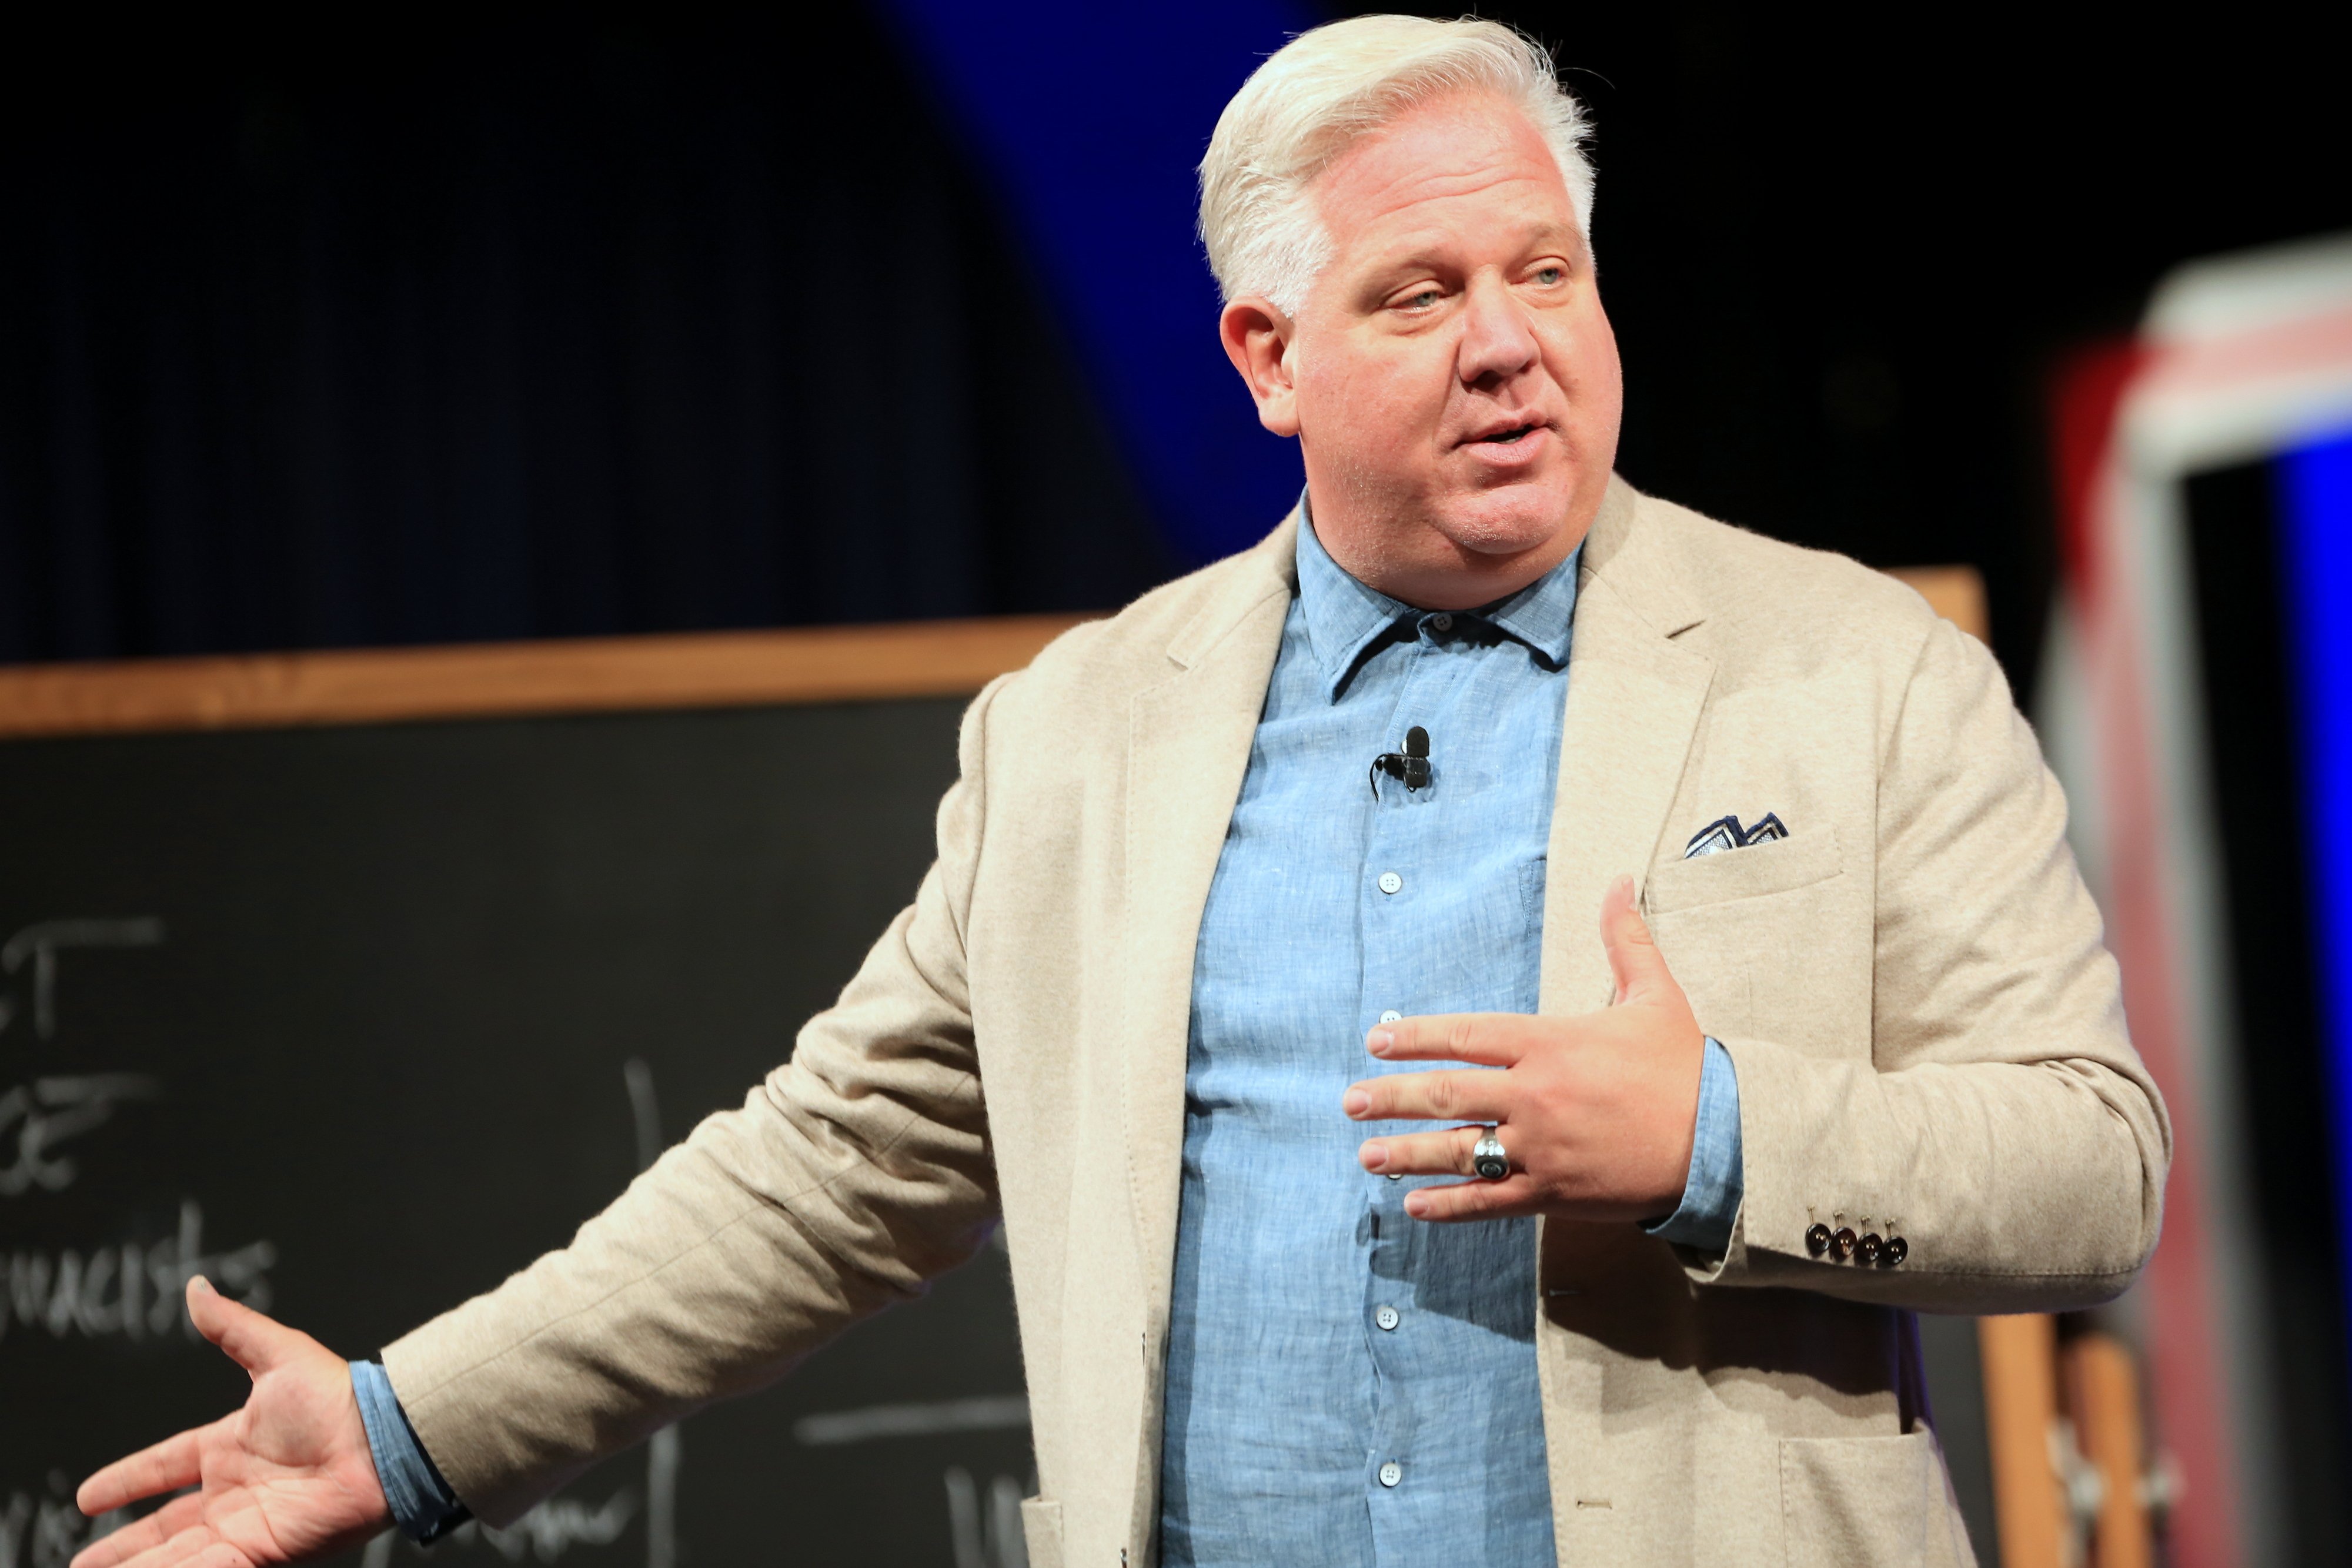 Glenn Beck speaks during the Conservative Political Action Conference (CPAC) in Dallas, Texas, the U.S., on Saturday, July 10, 2021. I Source: Getty Images